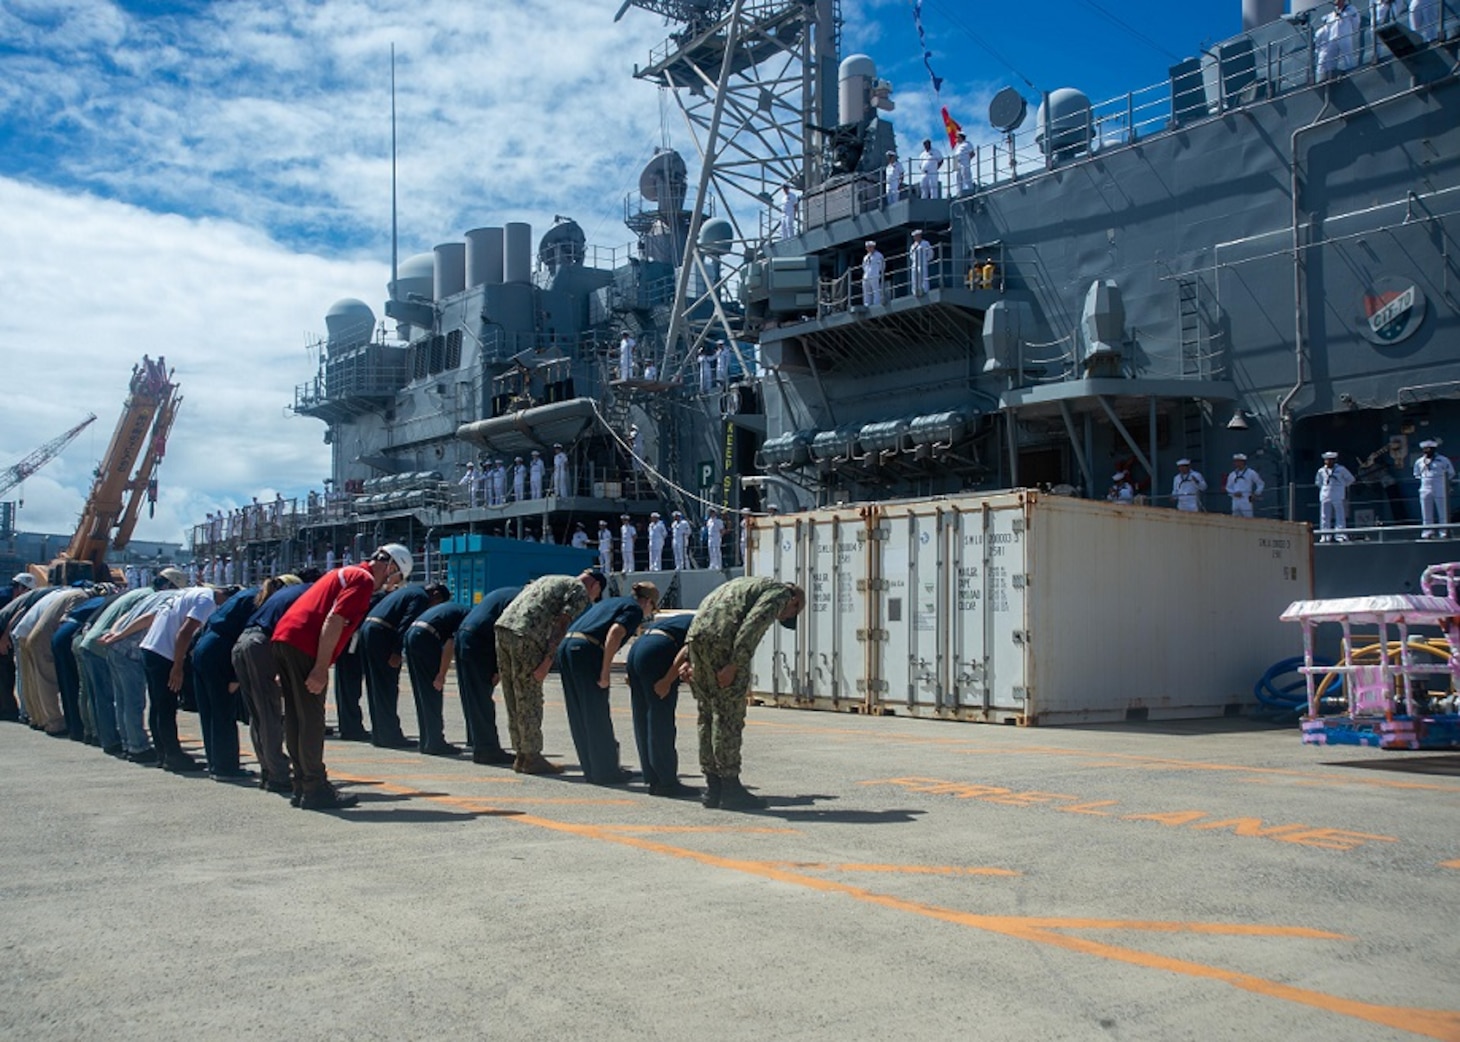 U.S. Navy Sailors and members of Ship Repair Facility (SRF) Yokosuka bow to the Ticonderoga-class guided-missile cruiser USS Shiloh (CG 67) in Yokosuka, Japan, Sept. 5, 2023. Shiloh departed Yokosuka on Sept. 5 to transit to its new homeport of Pearl Harbor, Hawaii, as part of a planned rotation of forces in the Pacific. Shiloh is attached to Commander, Carrier Strike Group 5 forward-deployed to the U.S. 7th Fleet area of operations in support of a free and open Indo Pacific. (U.S. Navy photo by Mass Communication Specialist 2nd Class Askia Collins)